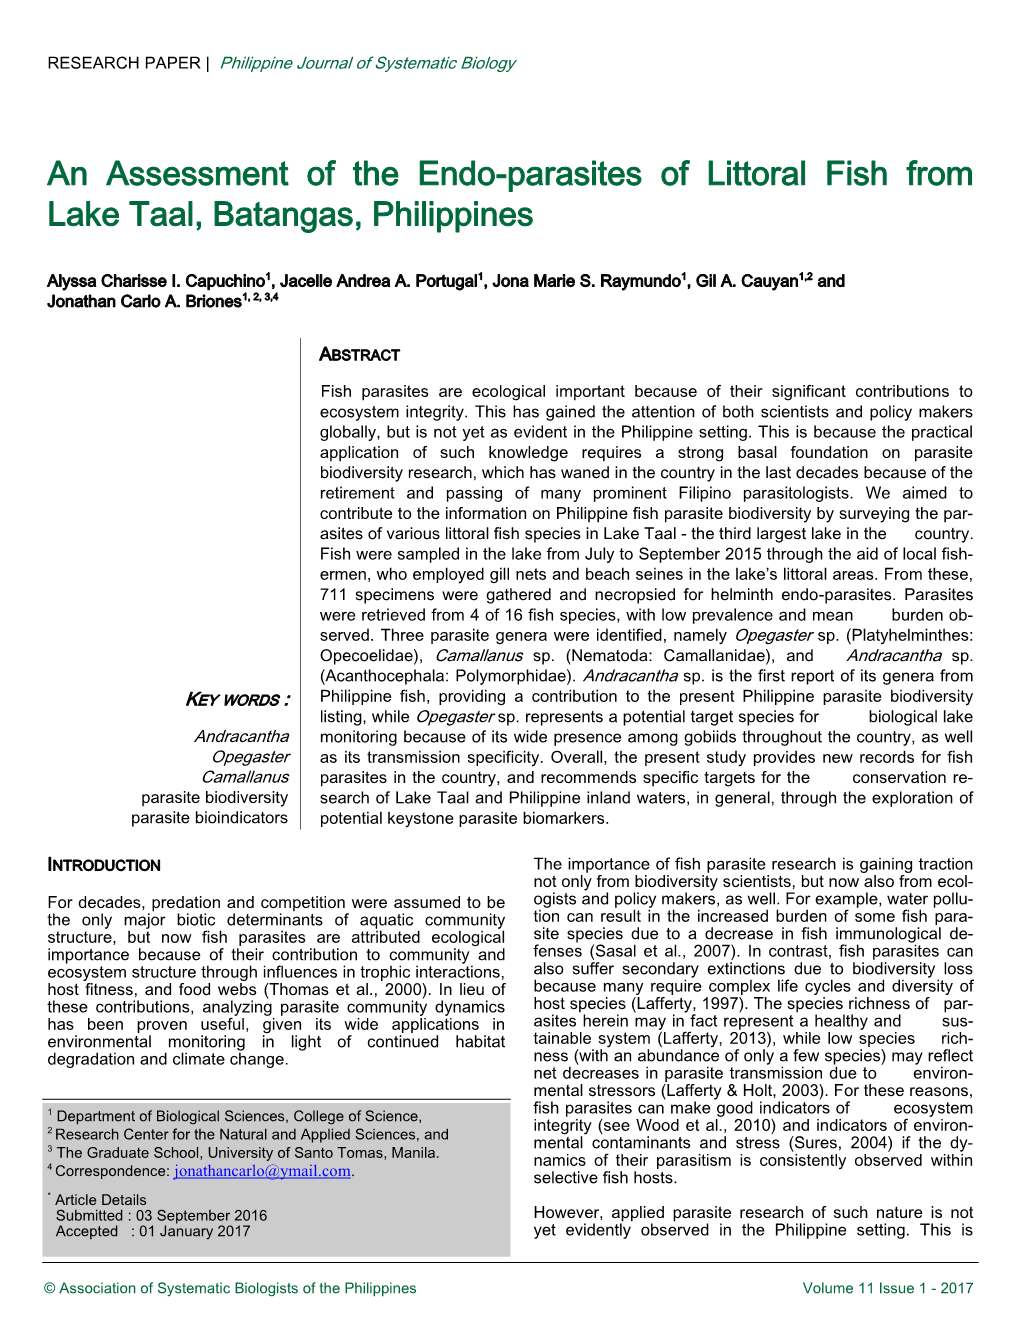 An Assessment of the Endo-Parasites of Littoral Fish from Lake Taal, Batangas, Philippines